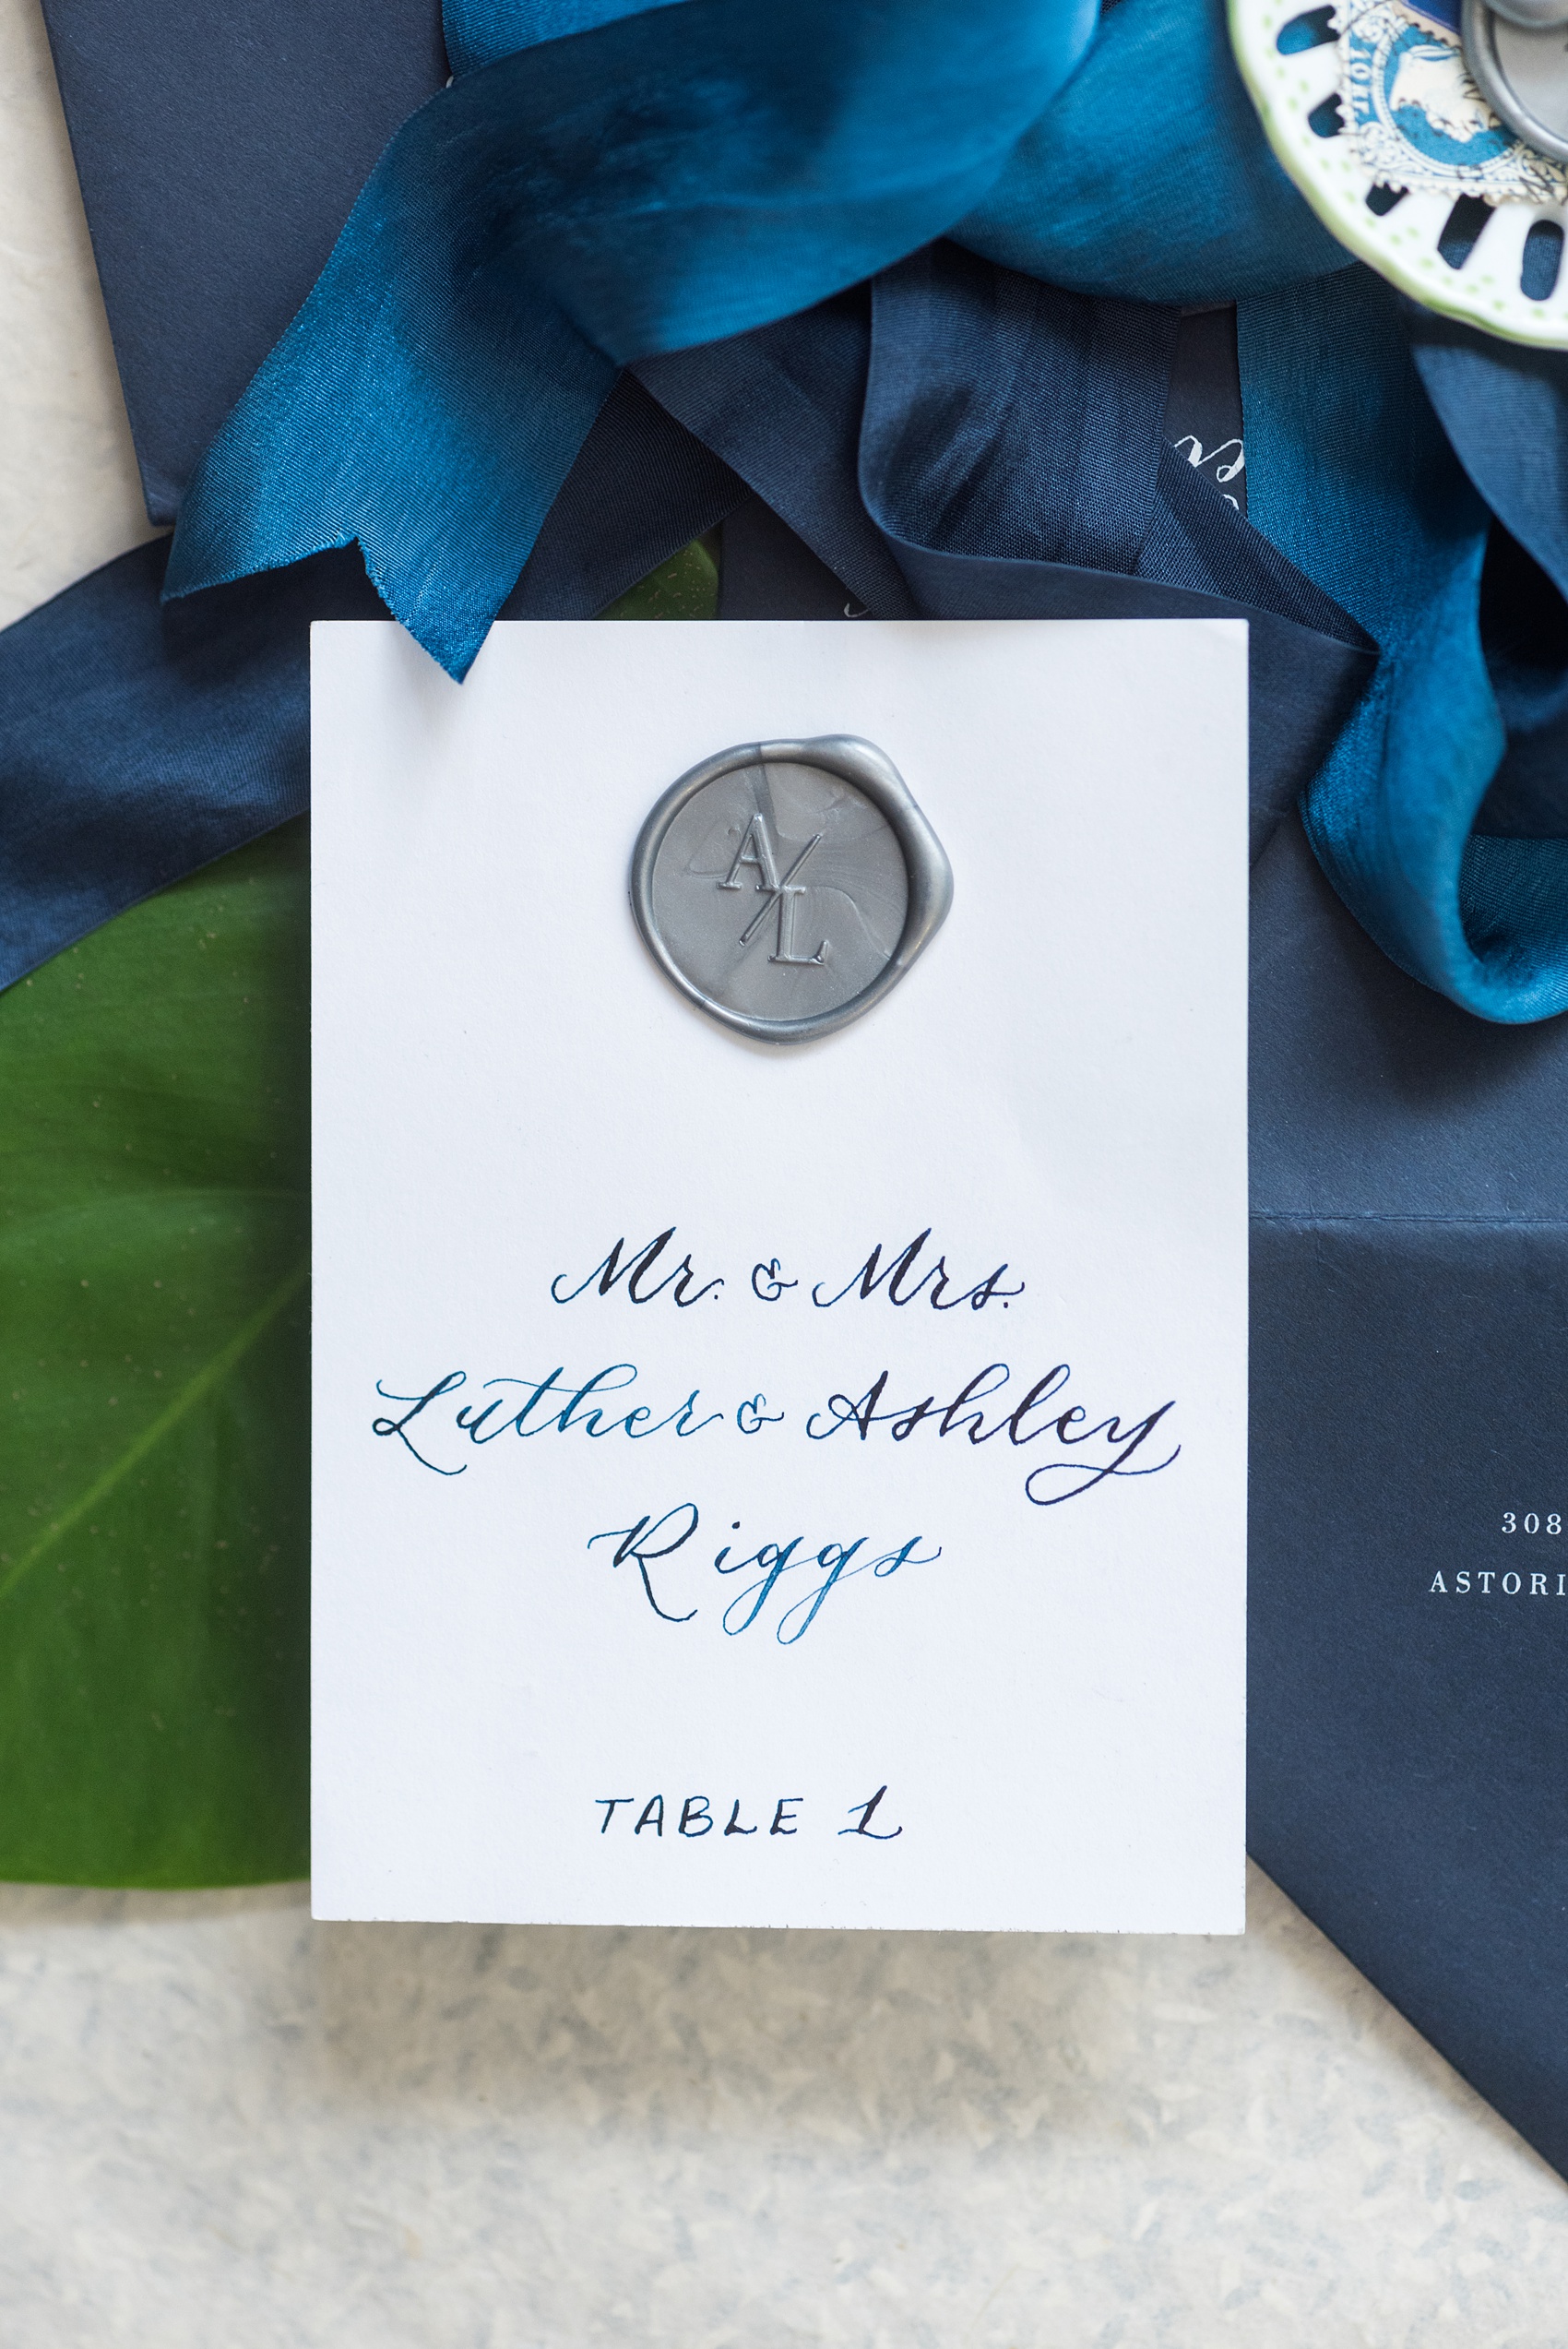 Casa de Campo in the Dominican Republic is a great location for a destination wedding. It’s in La Romana, an hour from Punta Cana, and is an all inclusive resort with Minitas beach and mountains view. It’s a beautiful venue, evidenced by these pictures by Mikkel Paige Photography. Click through for detail ideas like this custom calligraphy escort card display with wax seals! Planning by @theeventeur, cards by @agianetti of Write Pretty for Me. #mikkelpaige #escortcards #customcalligraphy